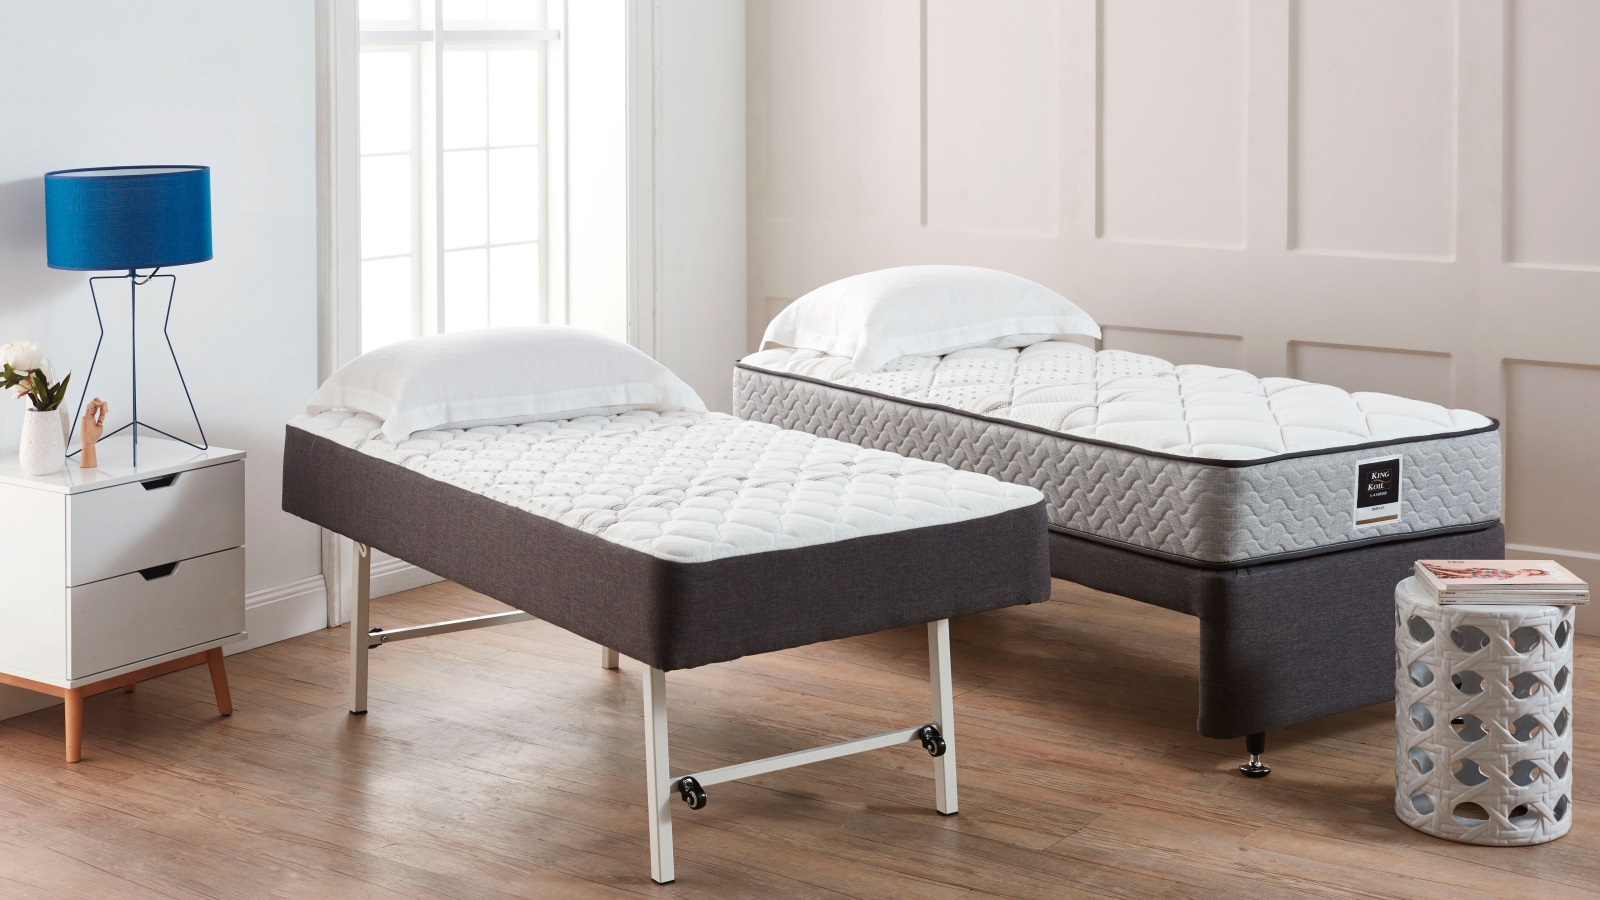 King Koil Rollaway Elevate Base And, Trundle Bed Pop Up To King